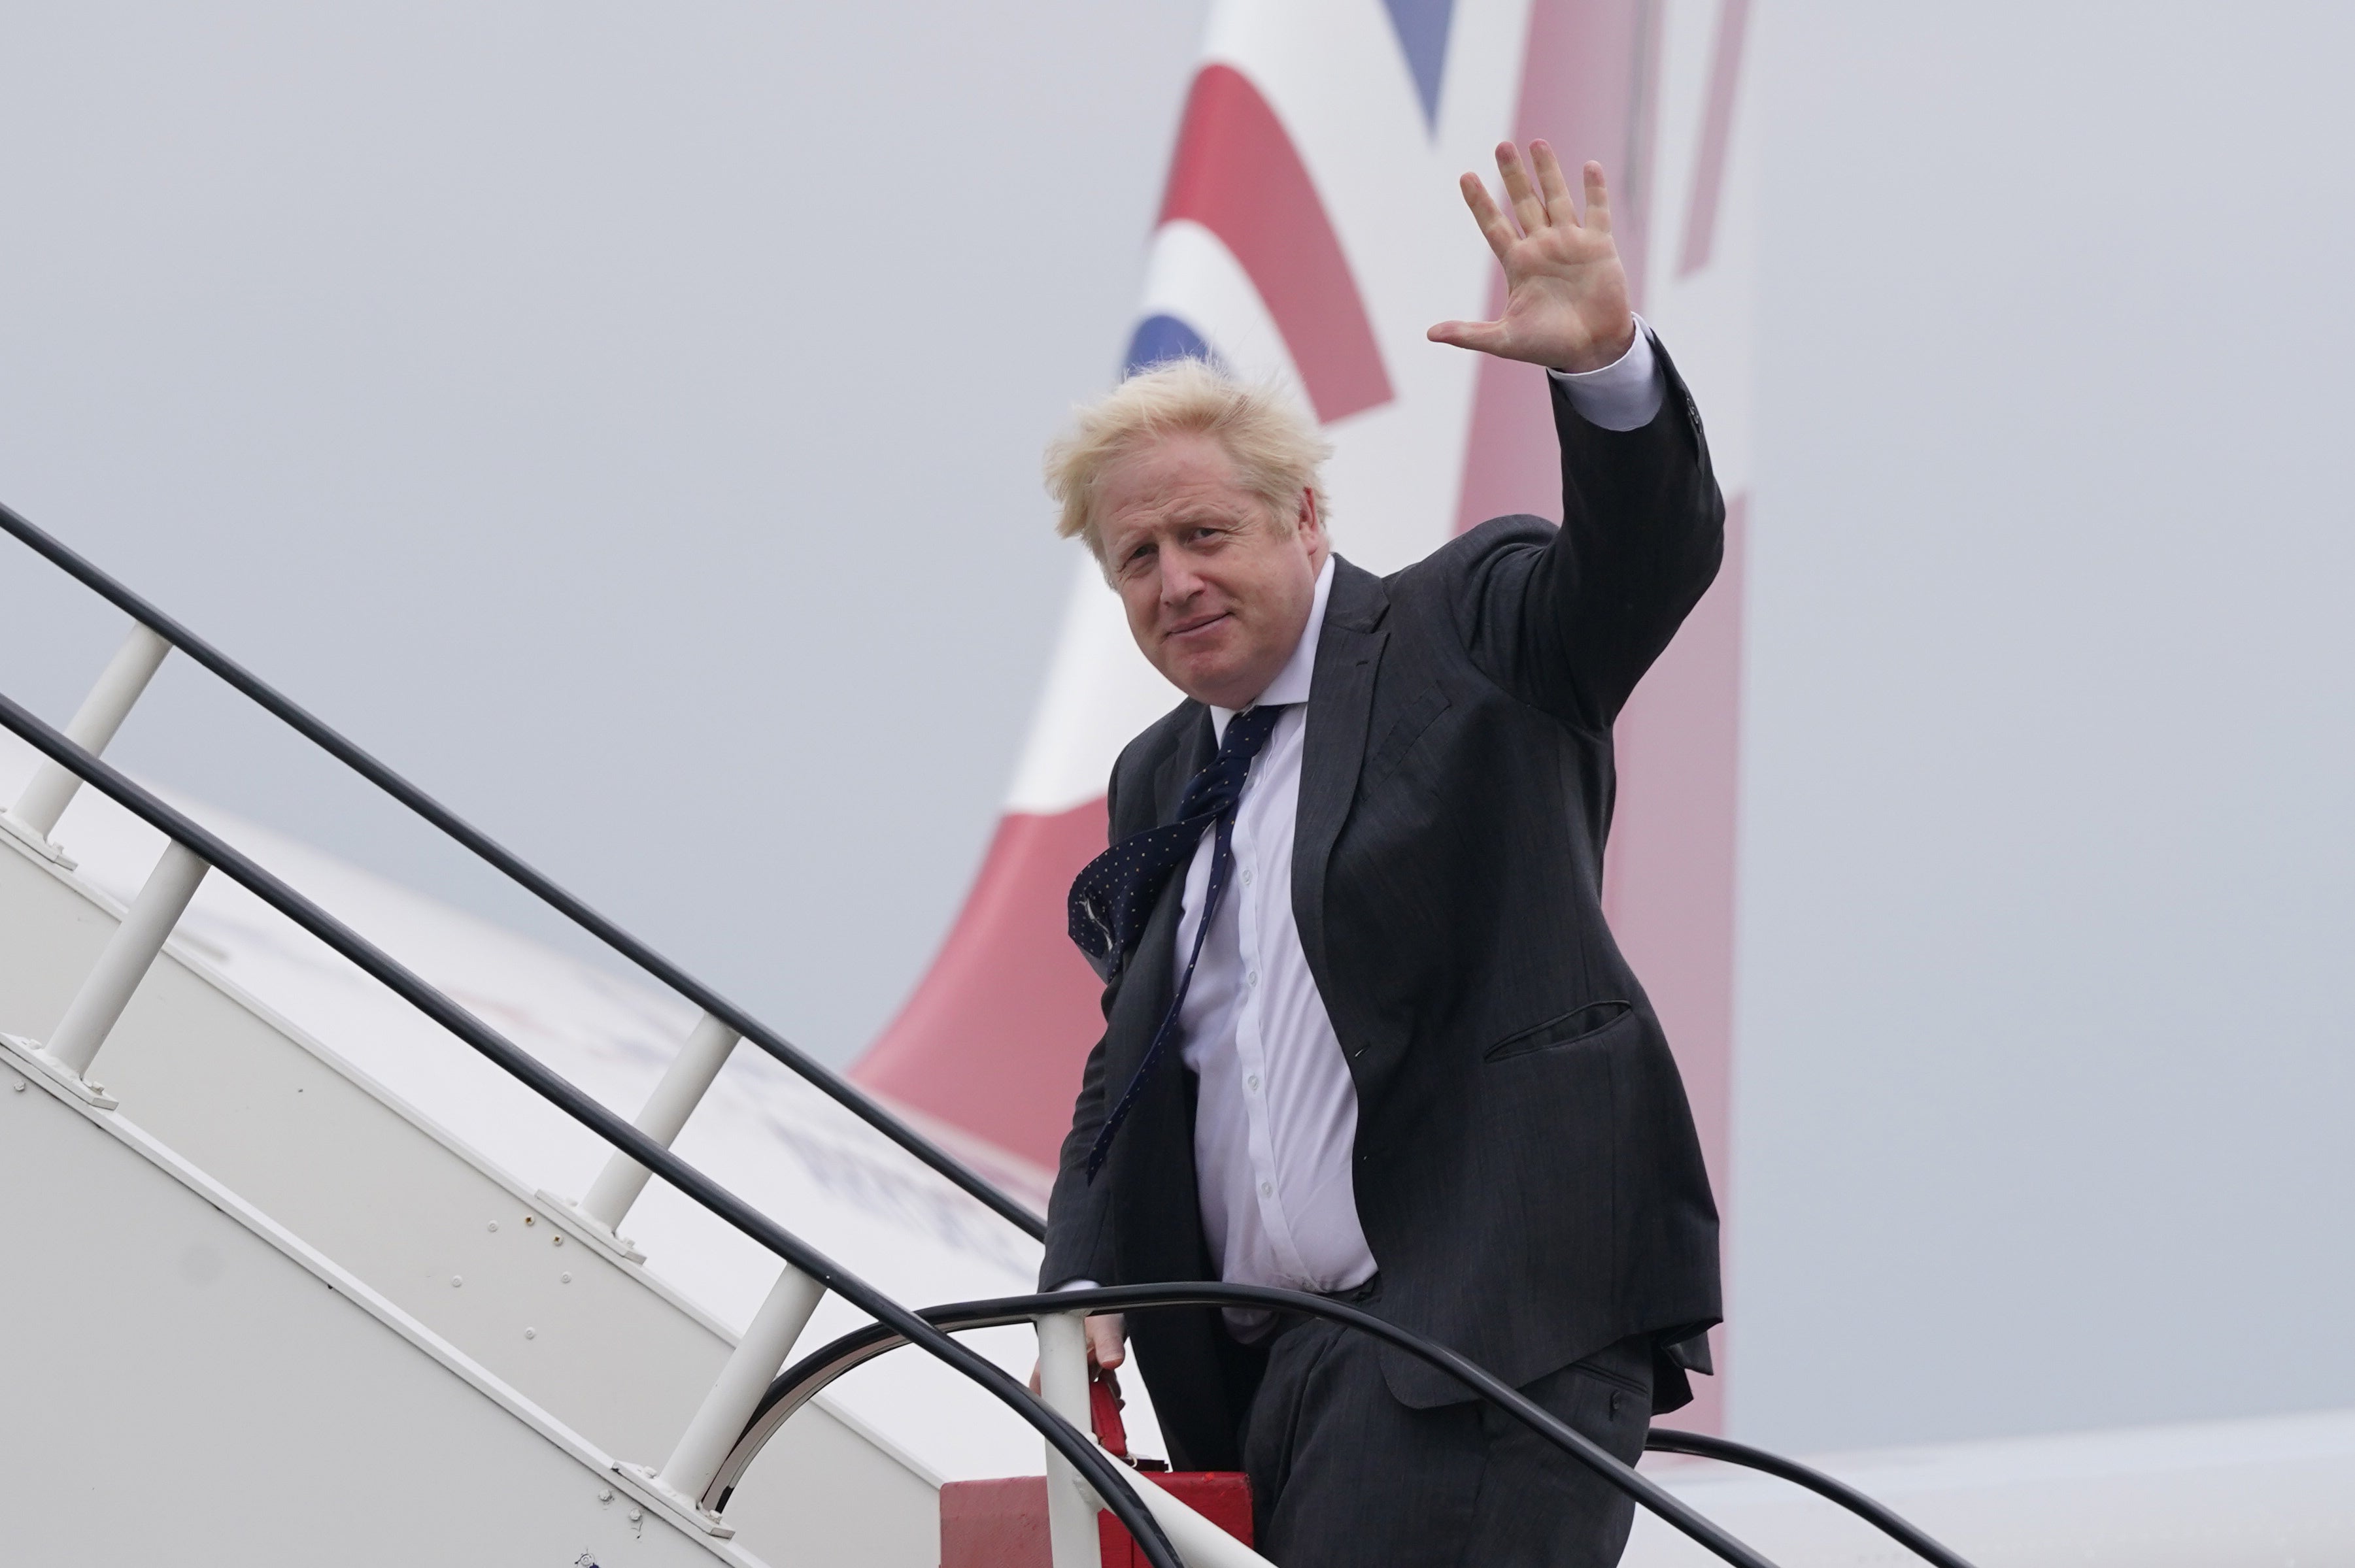 Boris Johnson is hoping to raise climate funds for poorer nations ahead of Cop26